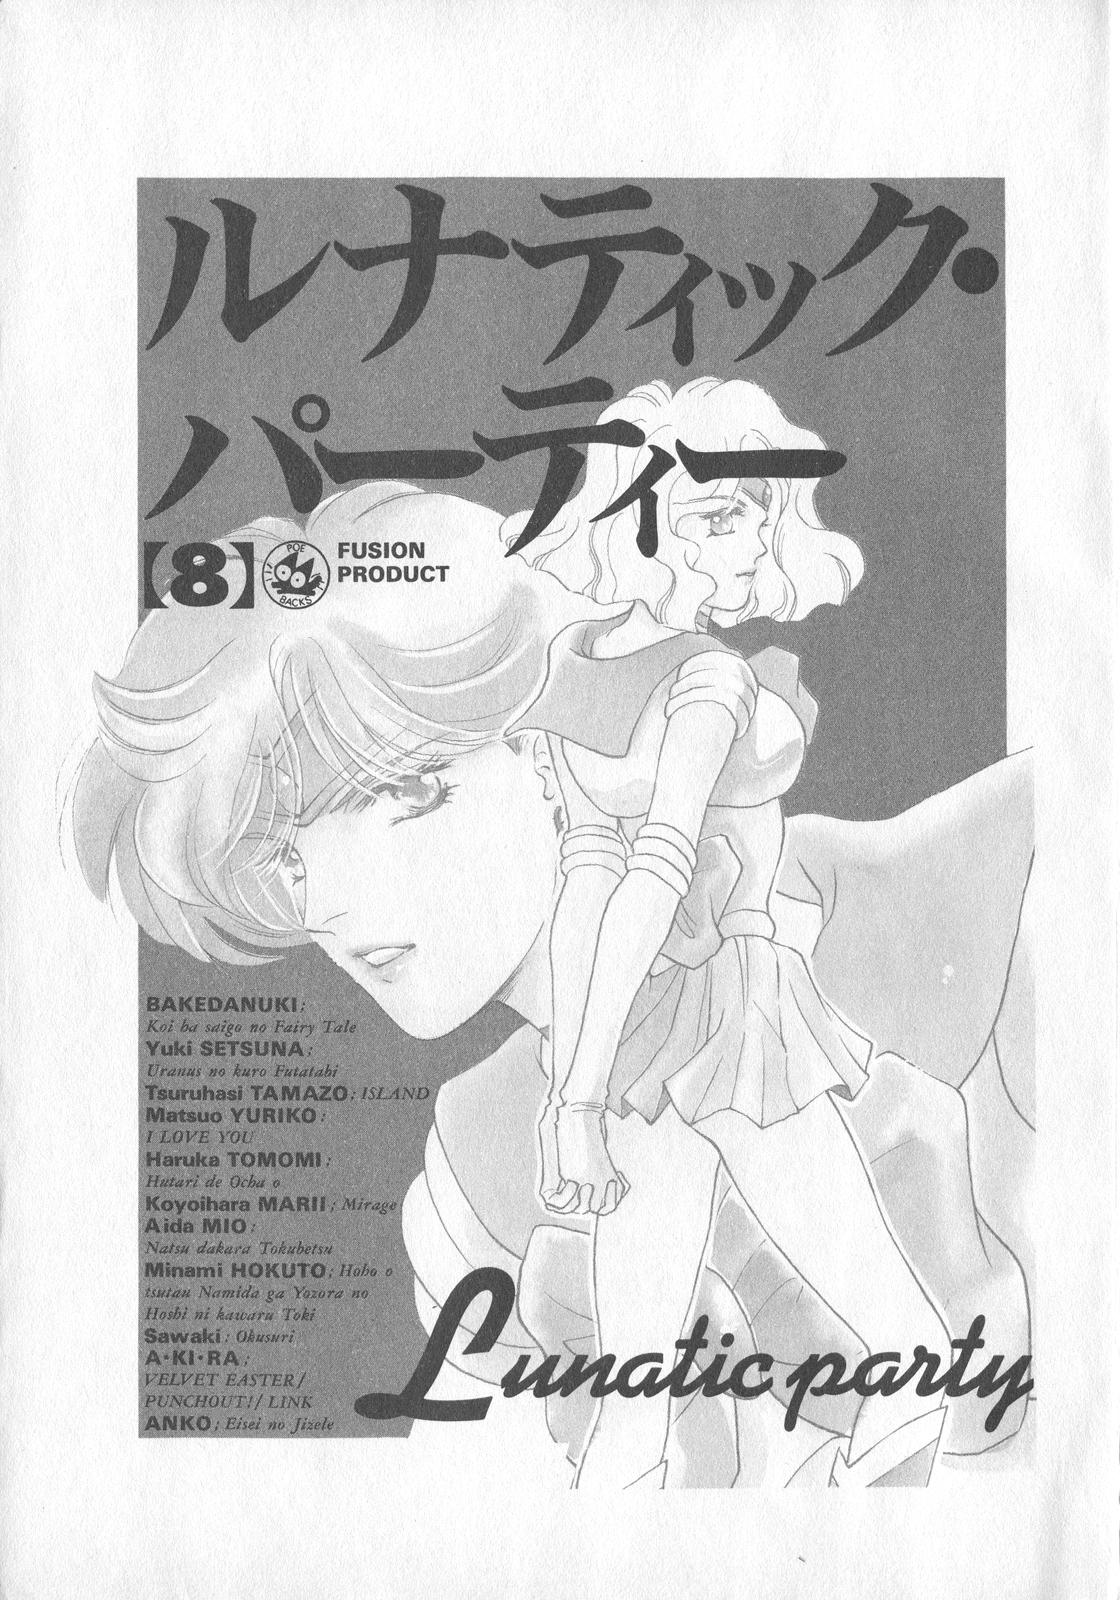 Teenager Lunatic Party 8 - Sailor moon Rola - Page 2